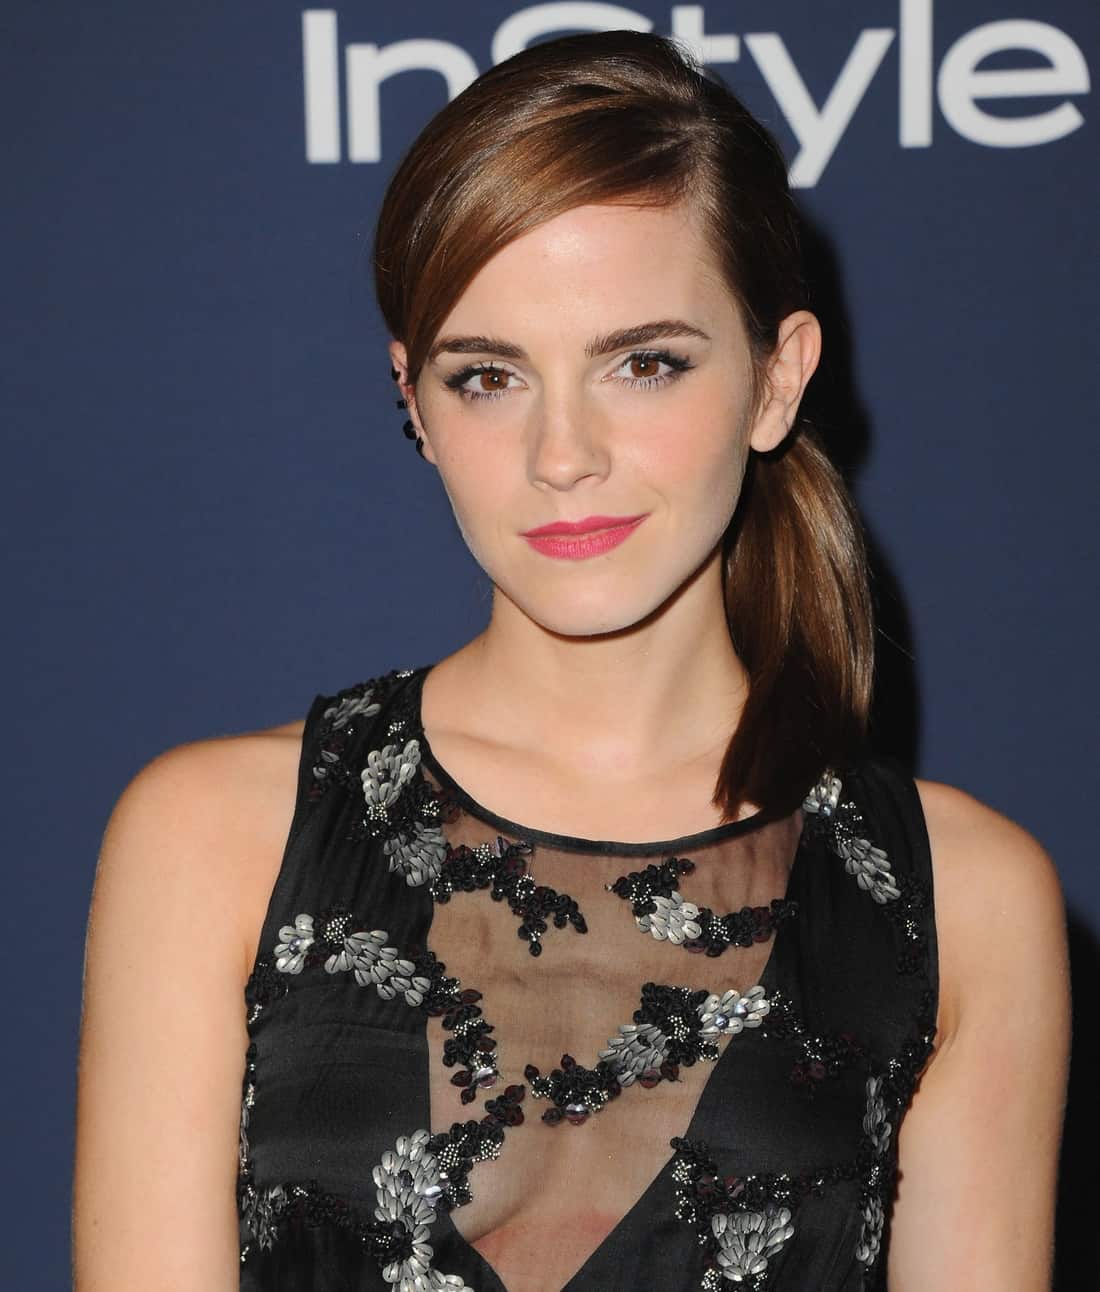 Emma Watson Wore a Dark Sheer Dress at the Golden Globes Afterparty